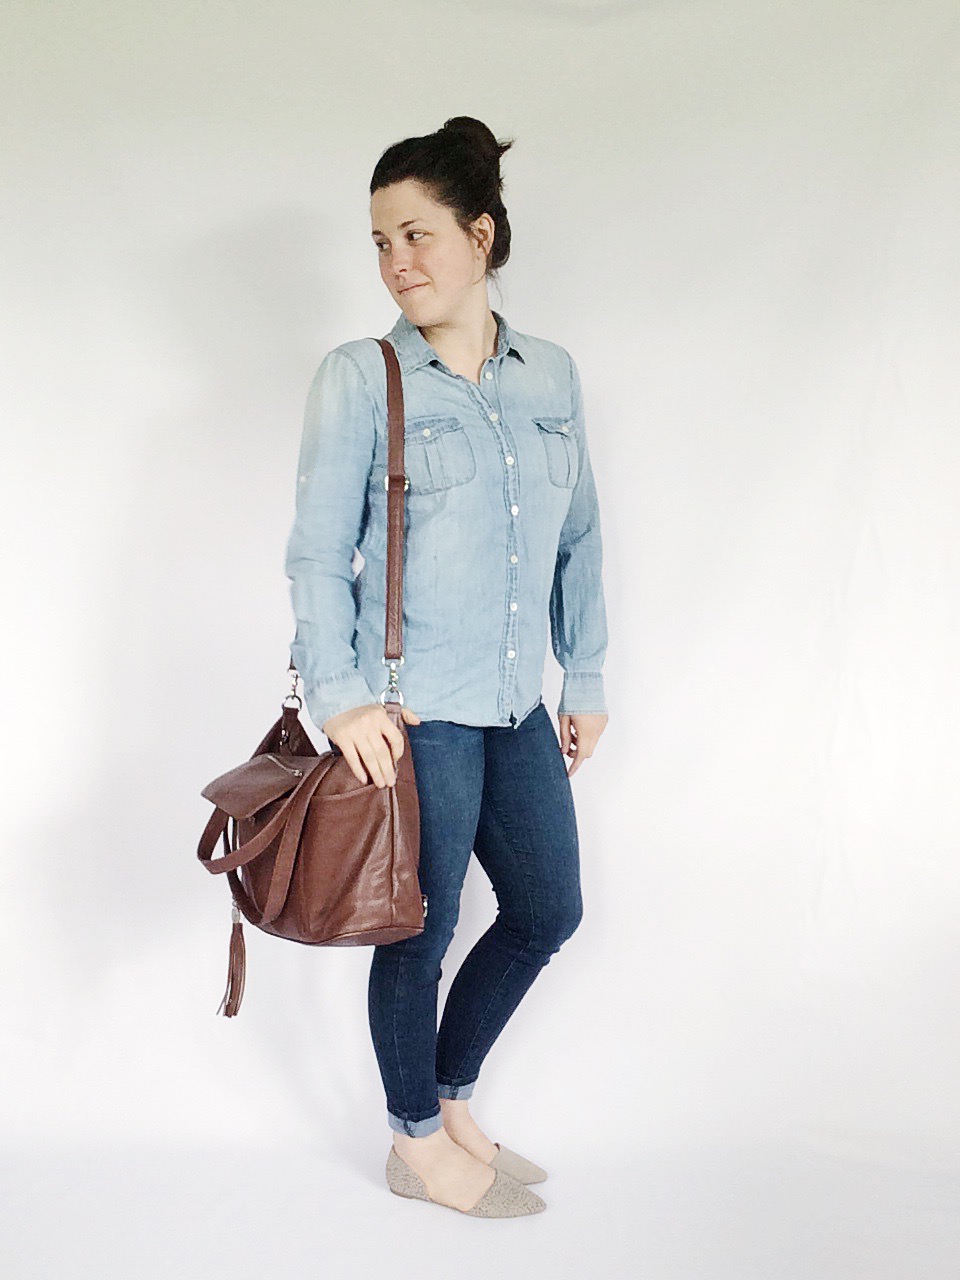 Use 10 pieces to create 10 unique everyday looks via thelovelylauralife.com | chambray, dark denim + patterned flat